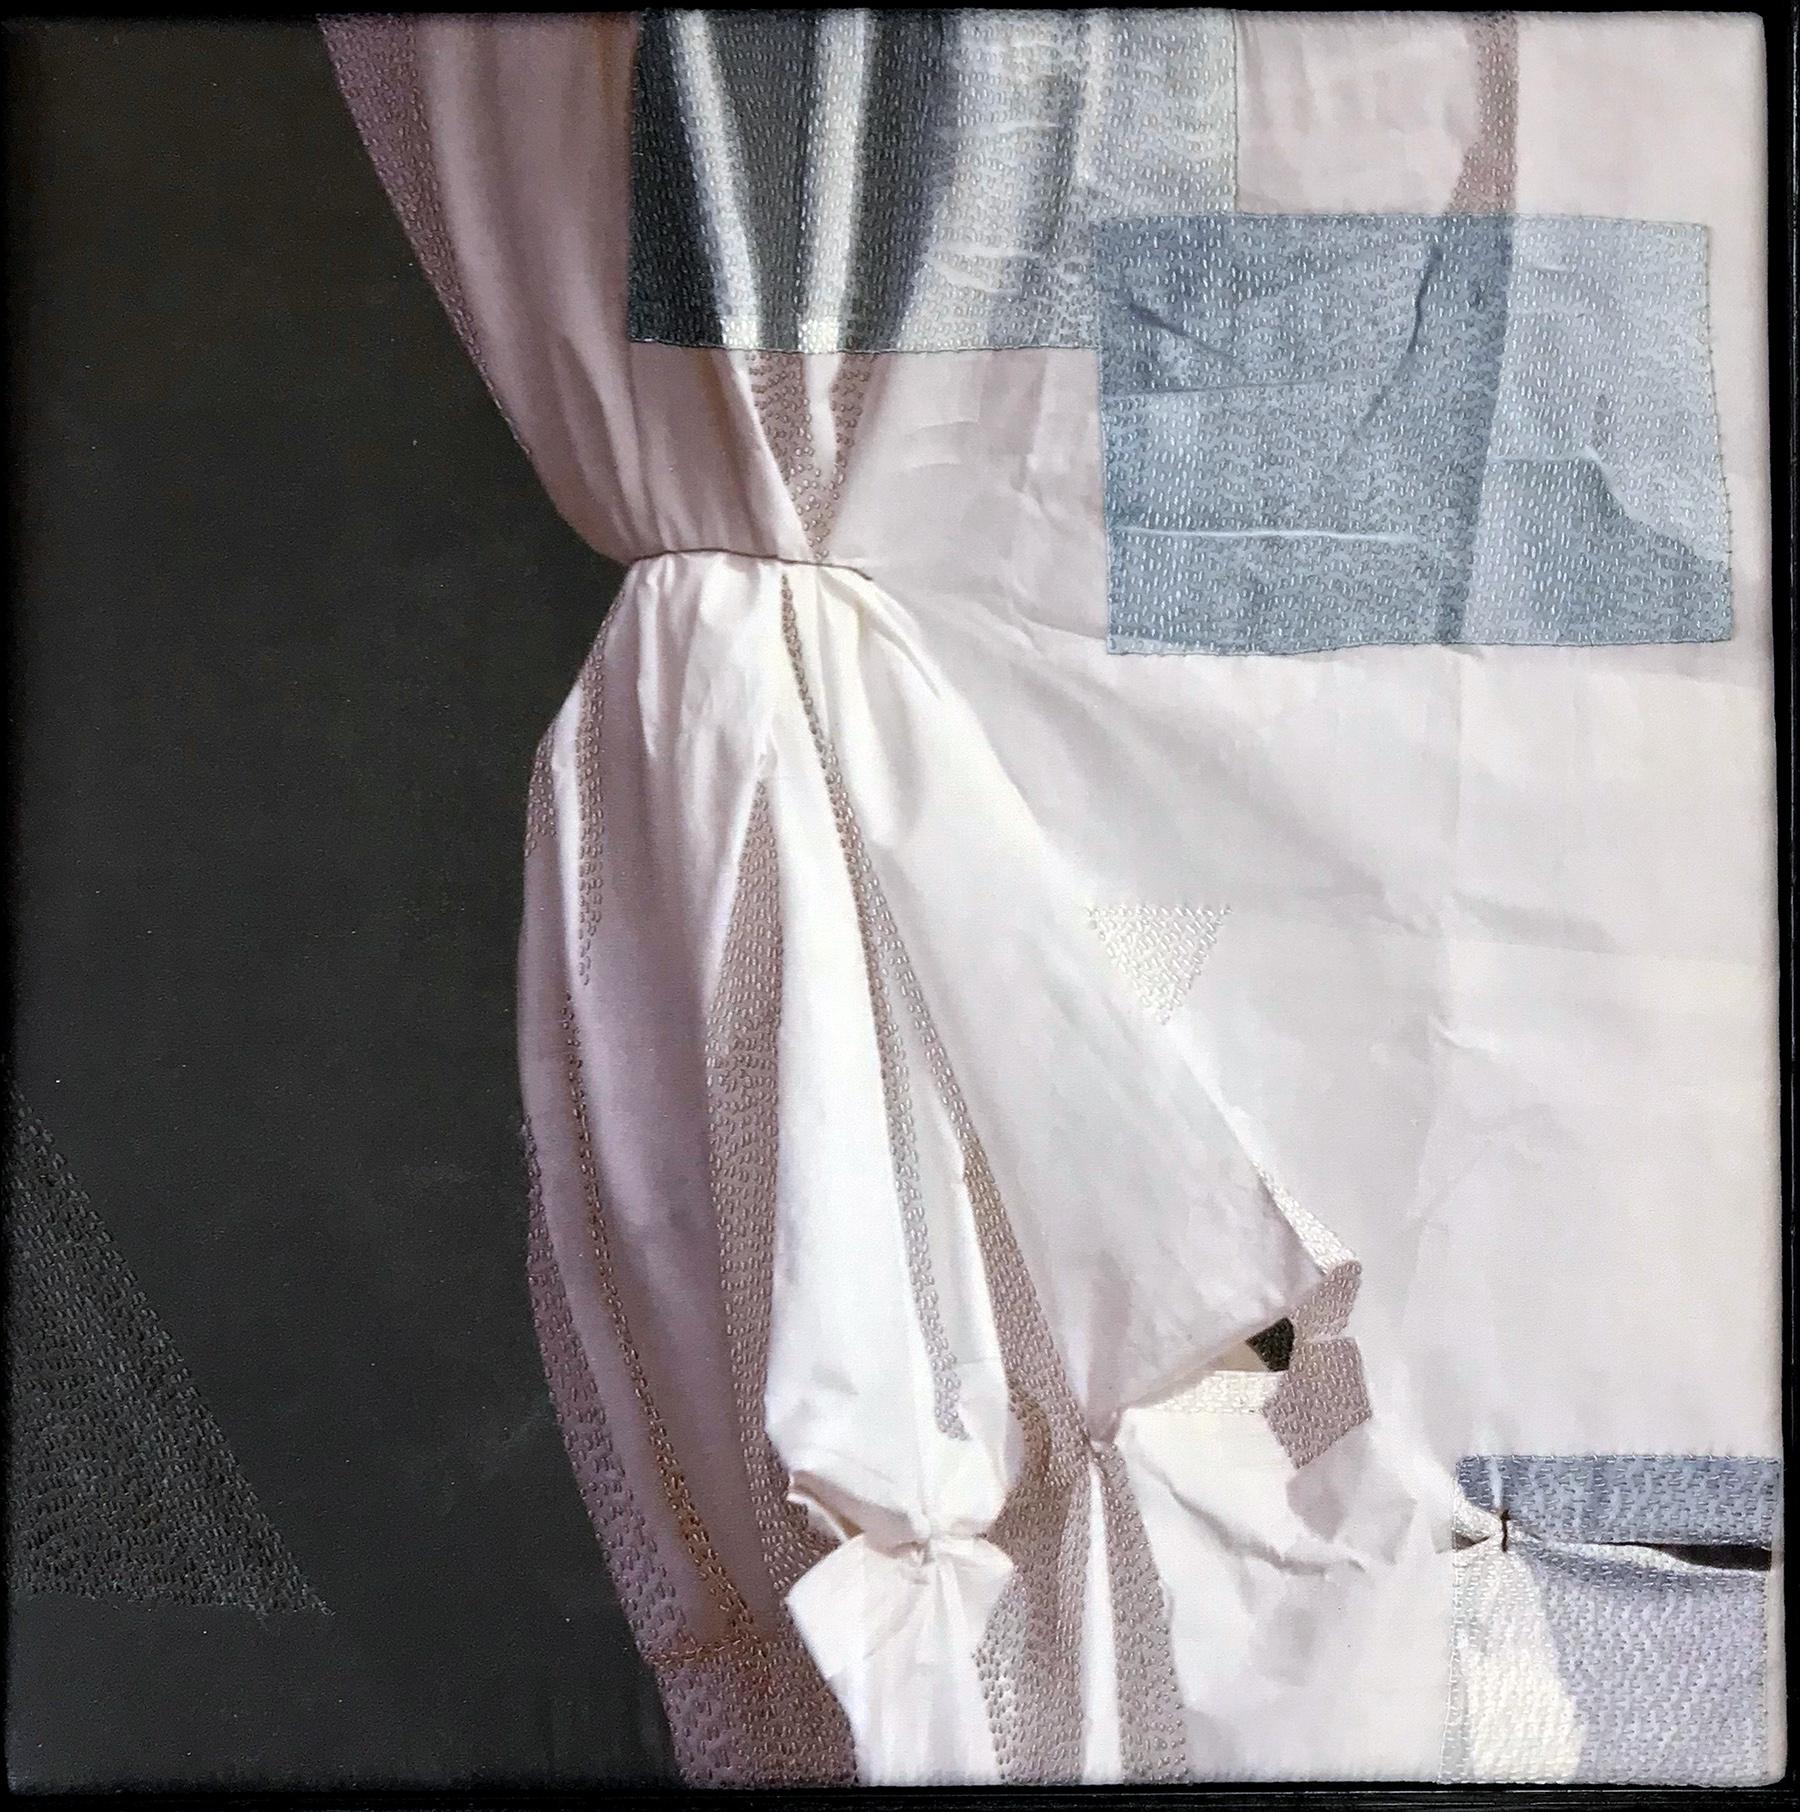 "Curtain Call / St. Louis", Original Photography, Printed on Silk, Hand Stitched